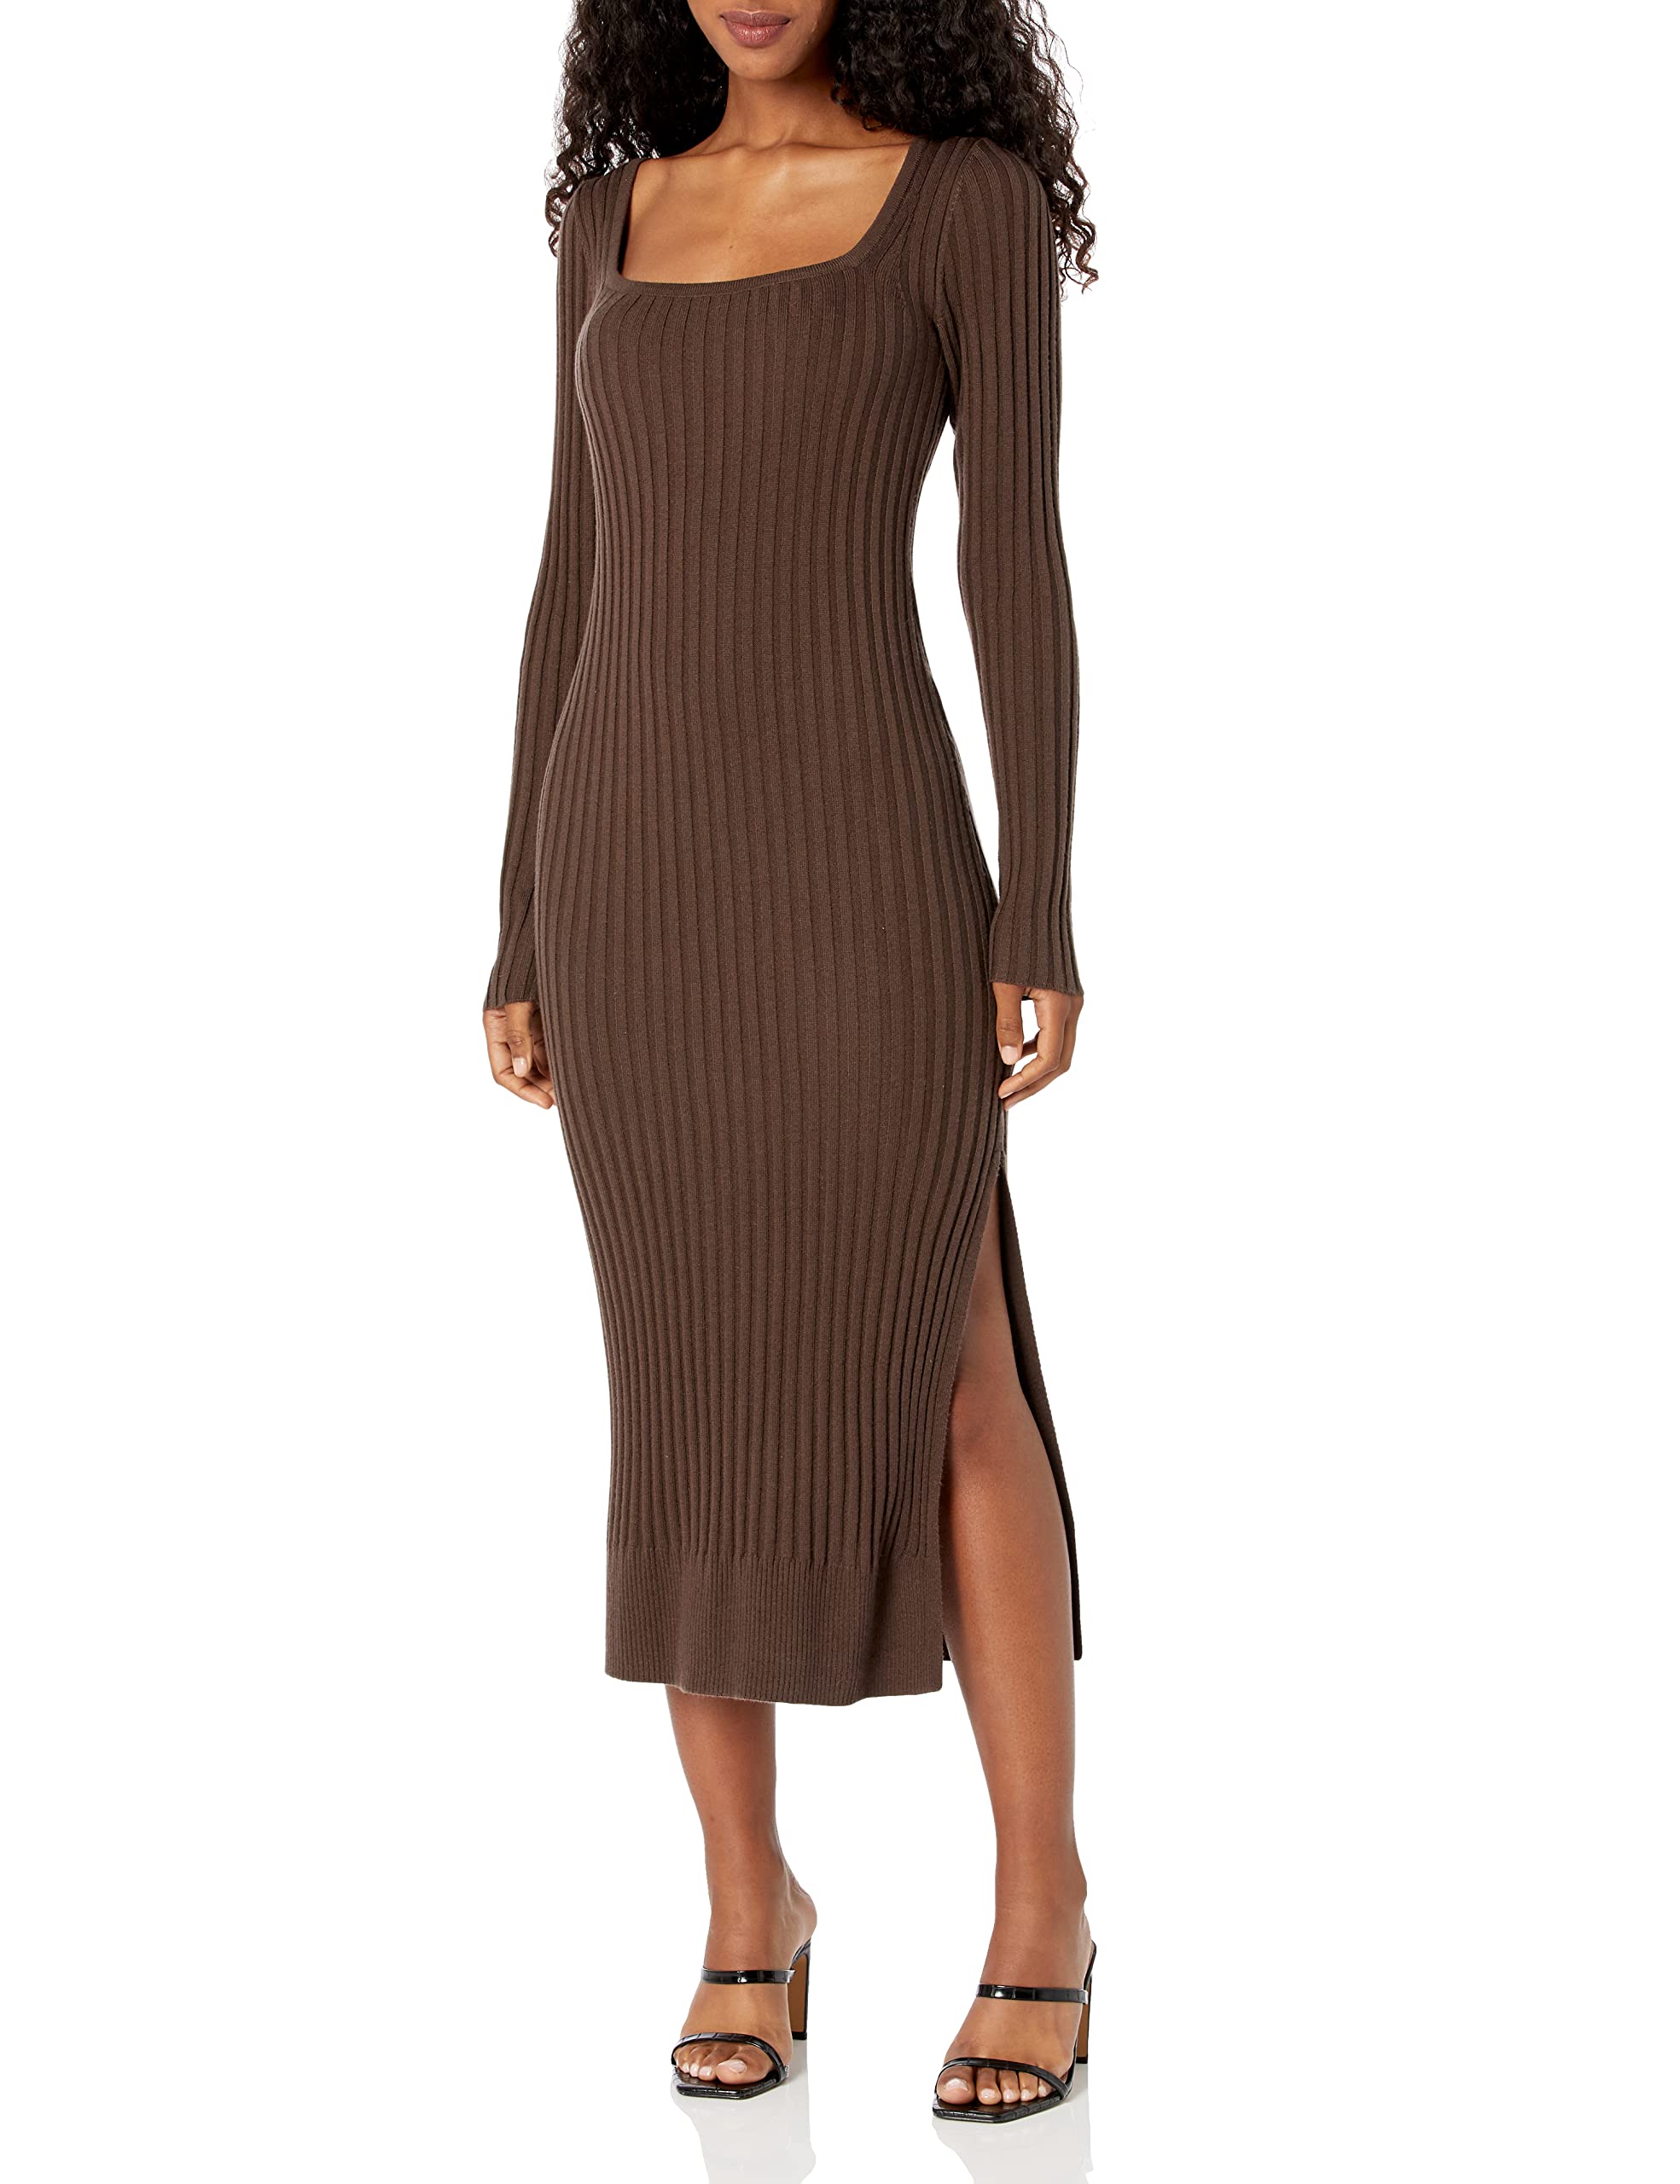 PAIGE Women's Benita Dress Long Sleeve Square Neckline Below The Knee in Brown Taupe